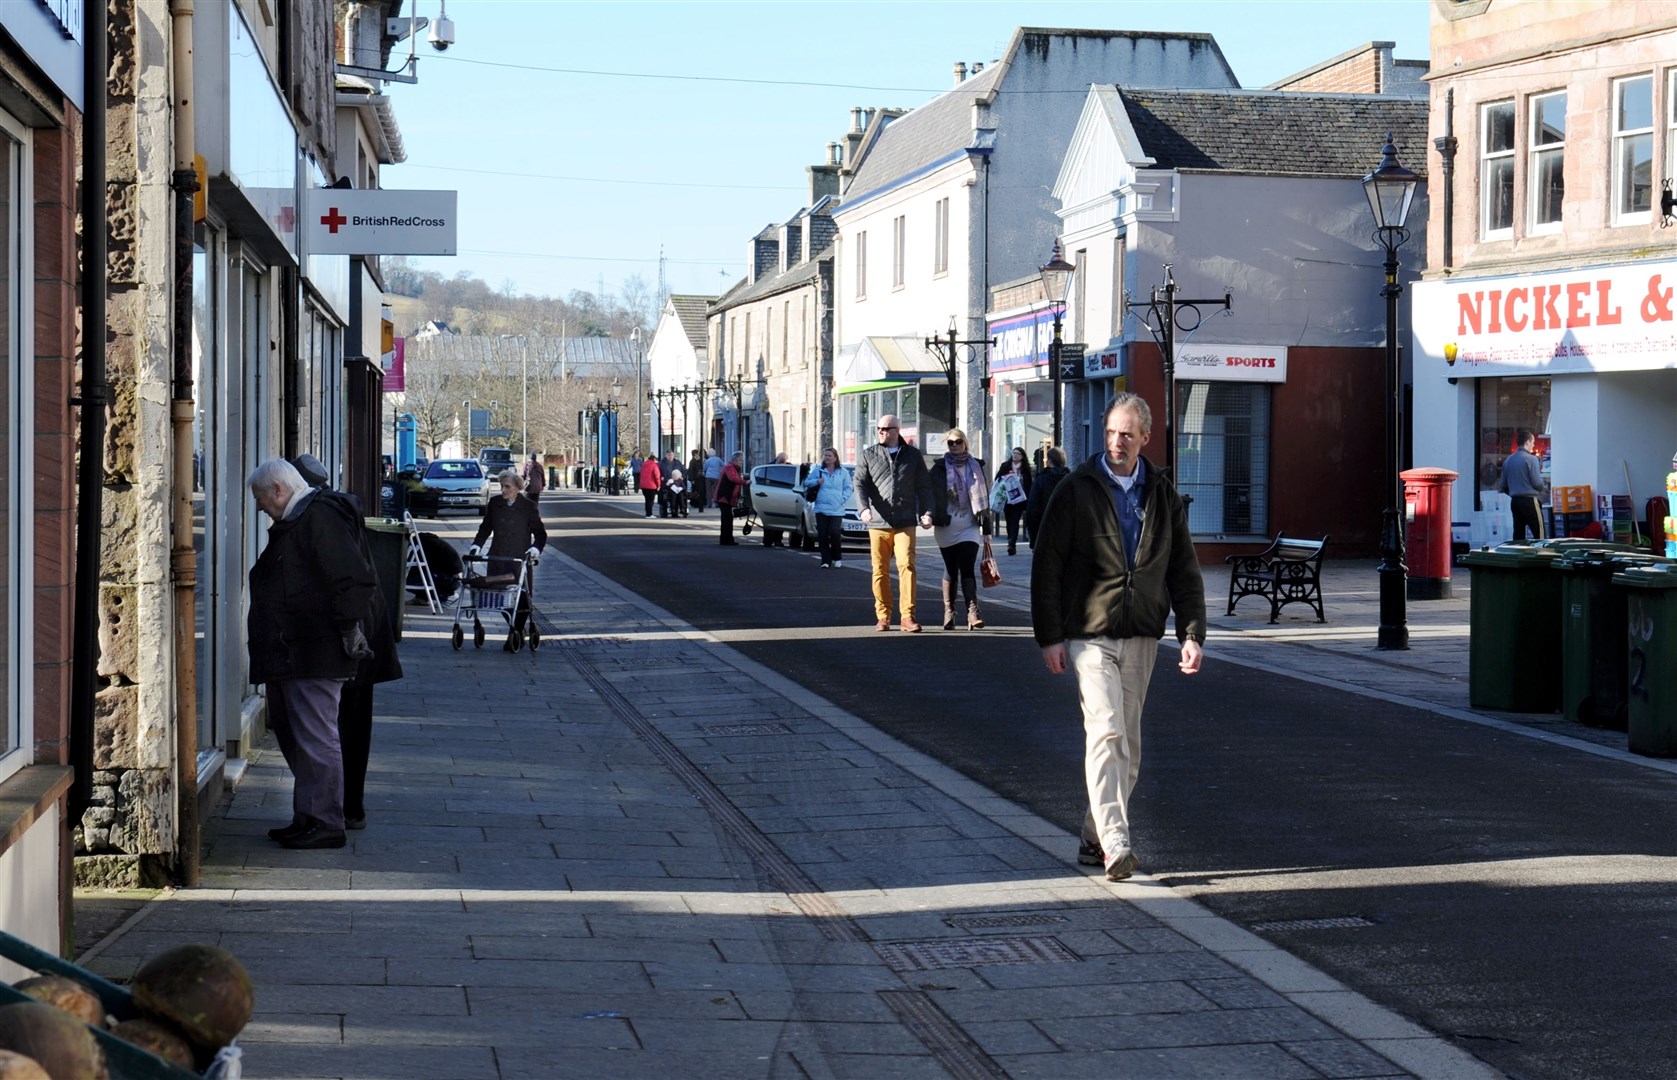 Footfall on High Streets will slowly start to increase after a long period of virtual hibernation.